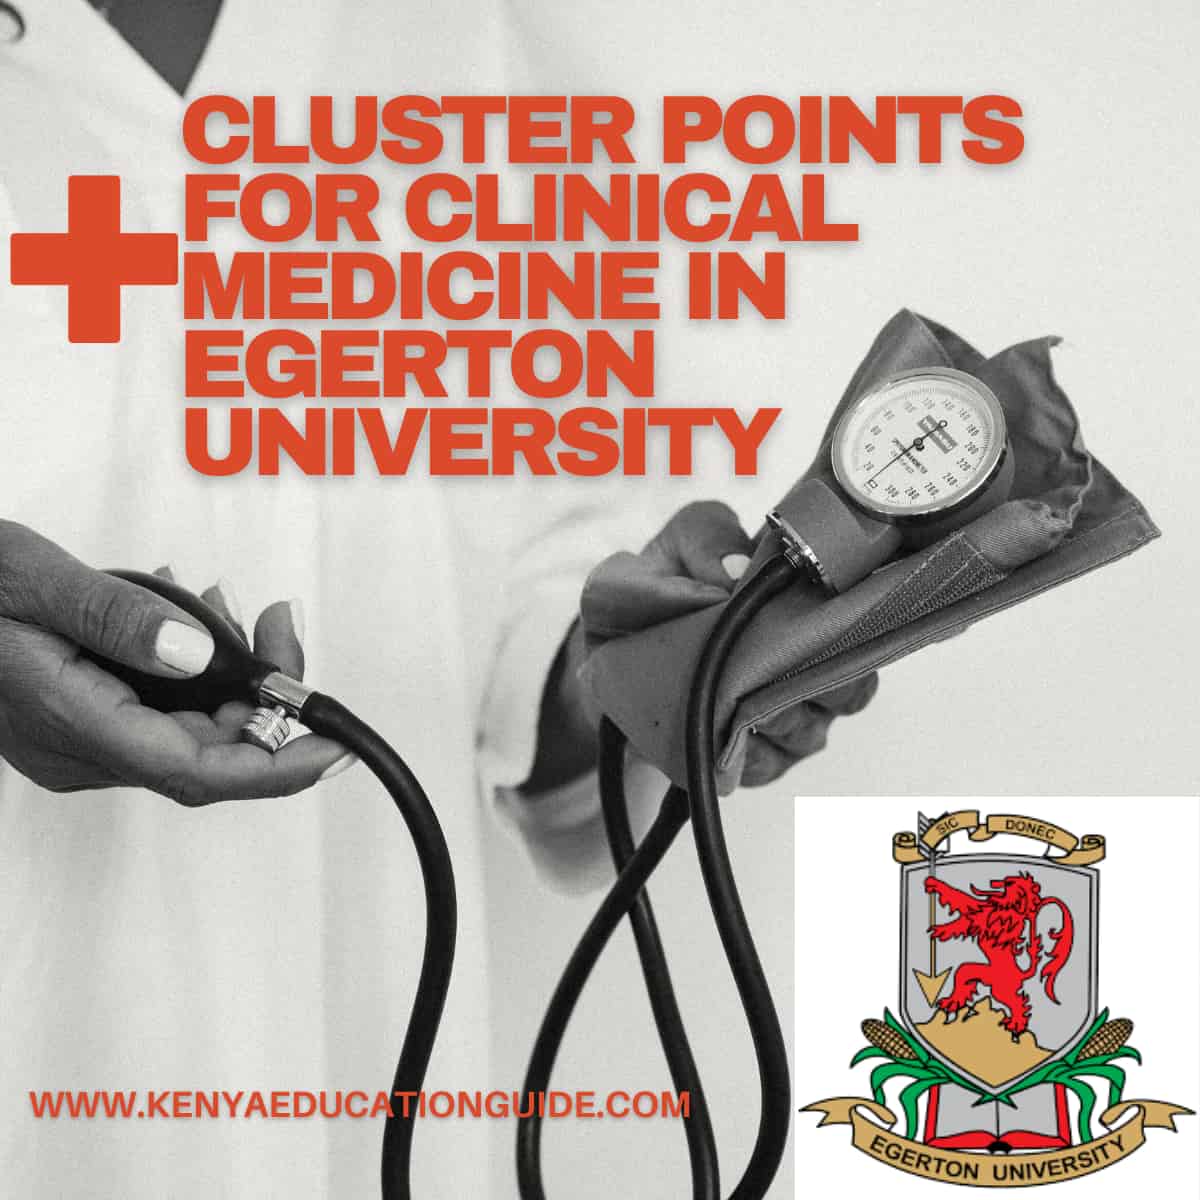 Cluster Points for Clinical Medicine in Egerton University